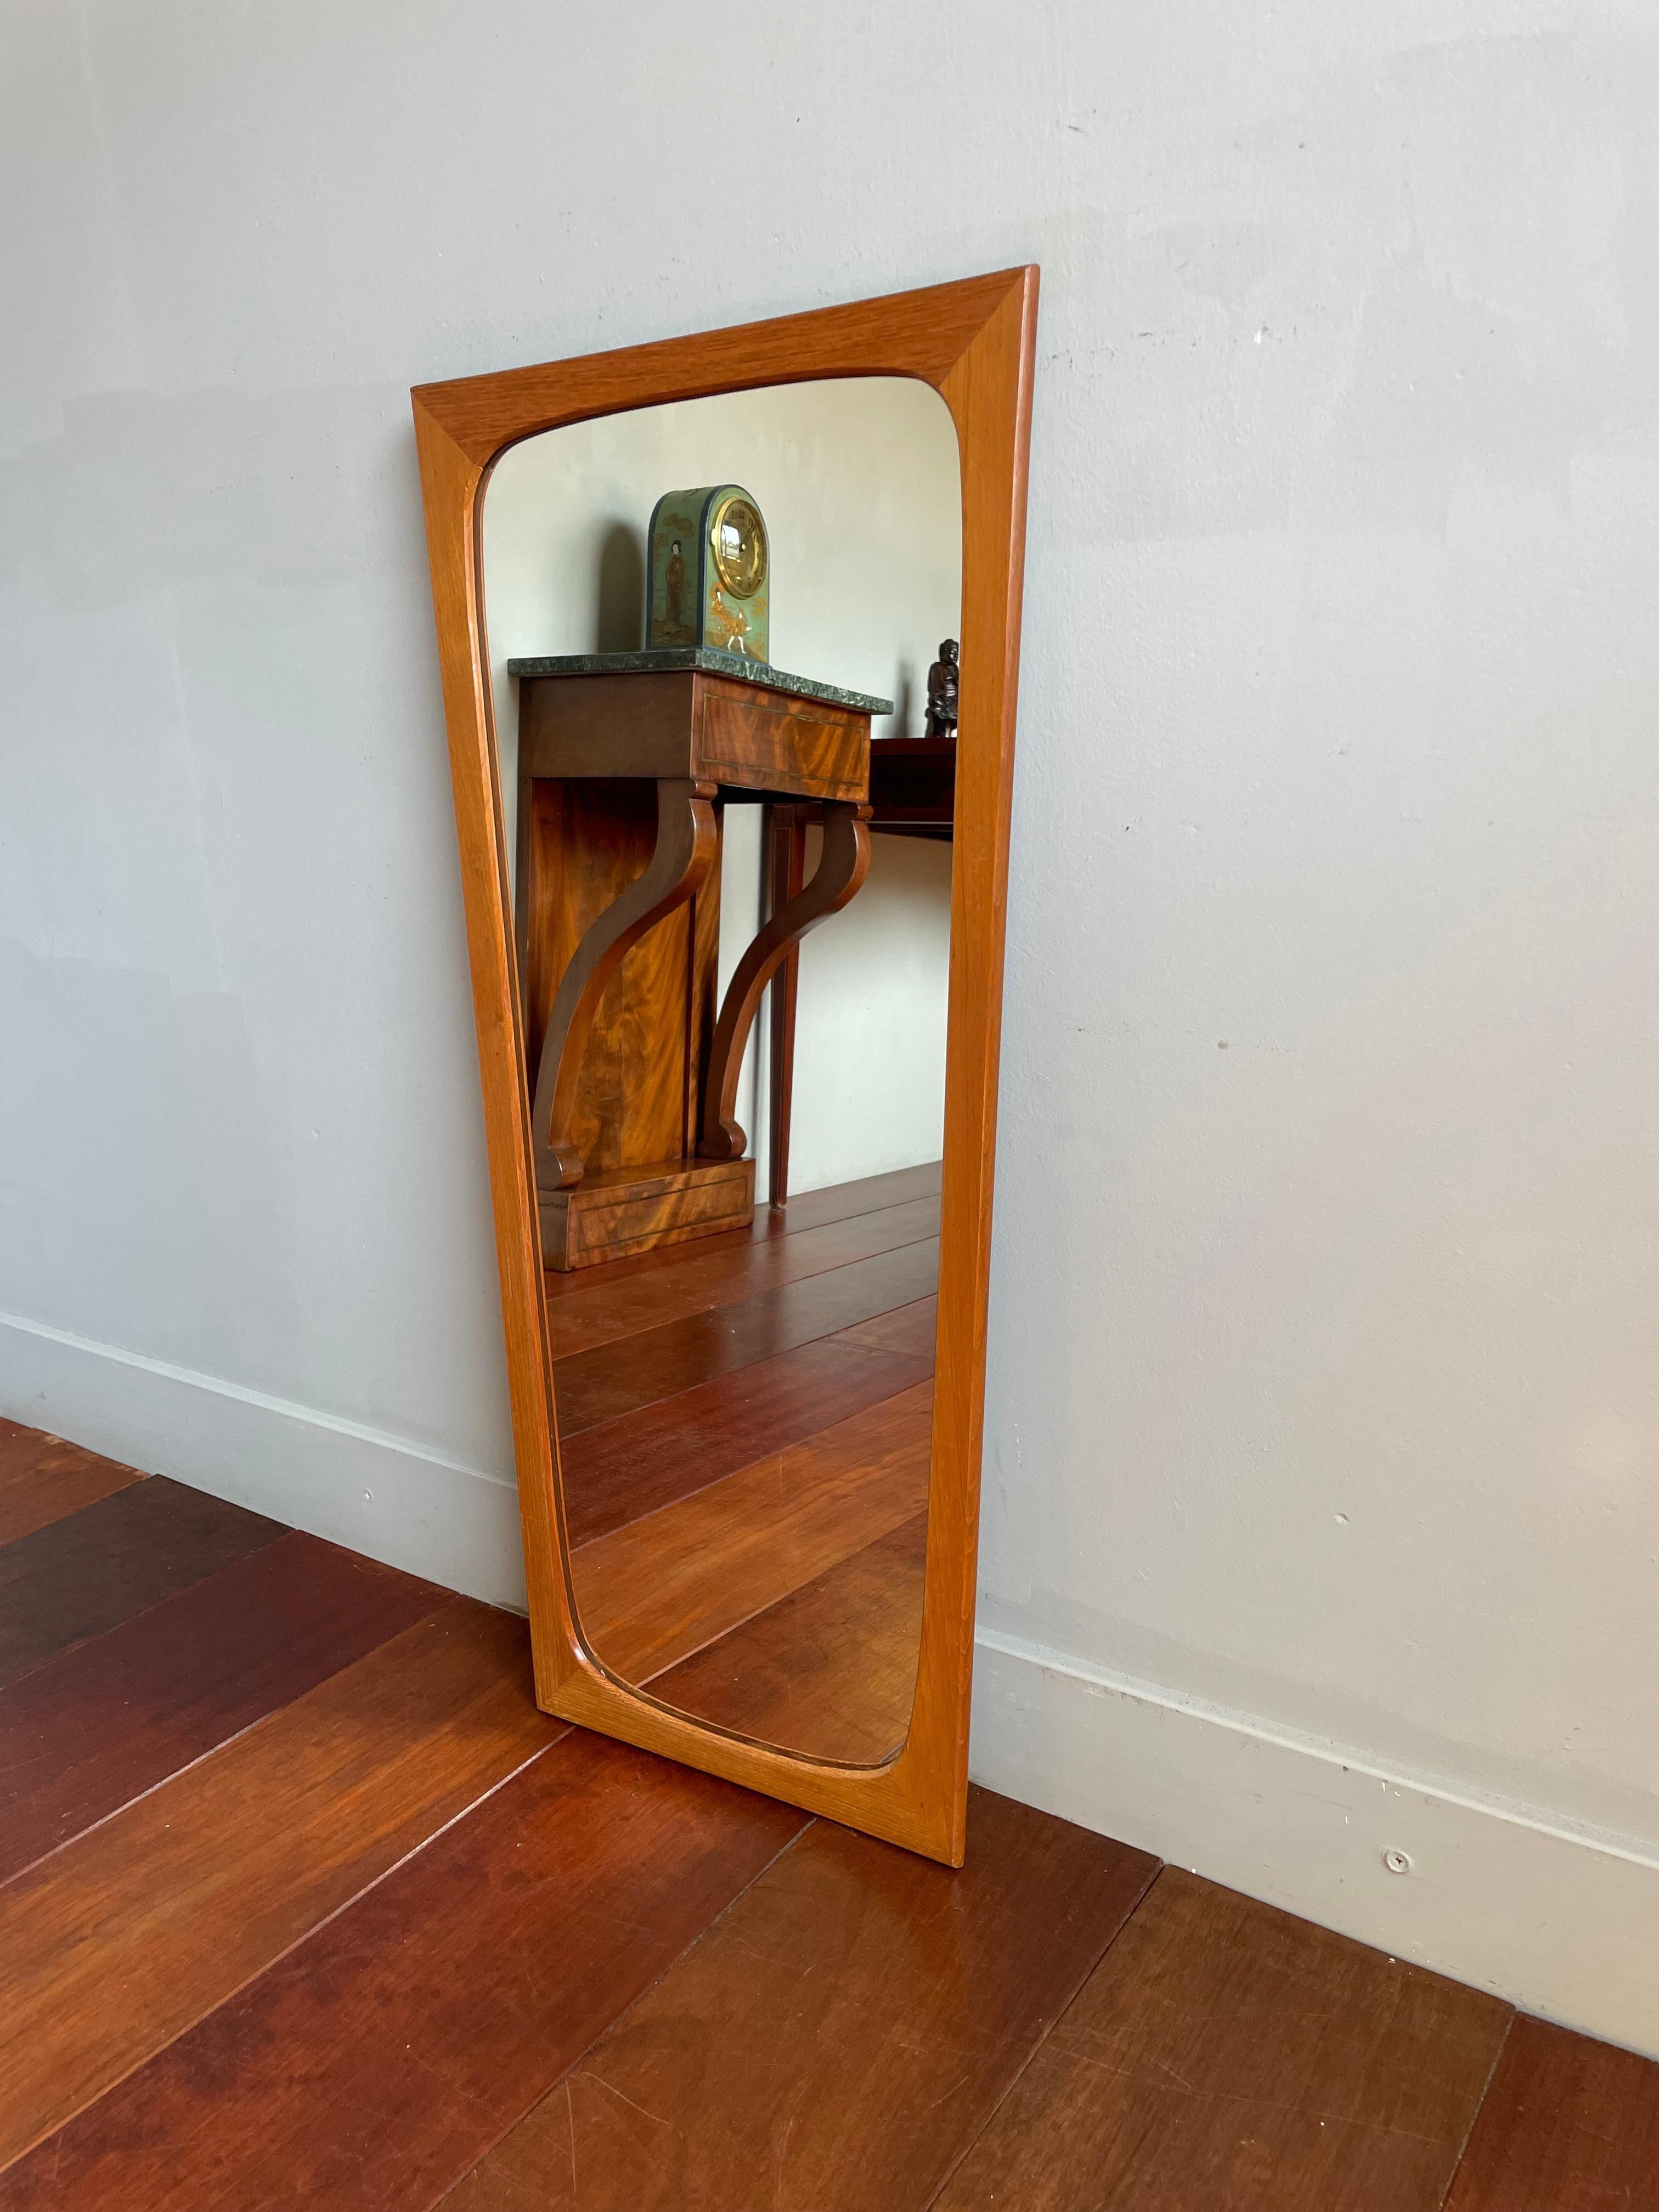 Rare Mid-Century Modern Wall / Make Up Mirror in Superb Teak Wooden Frame 1960s For Sale 2